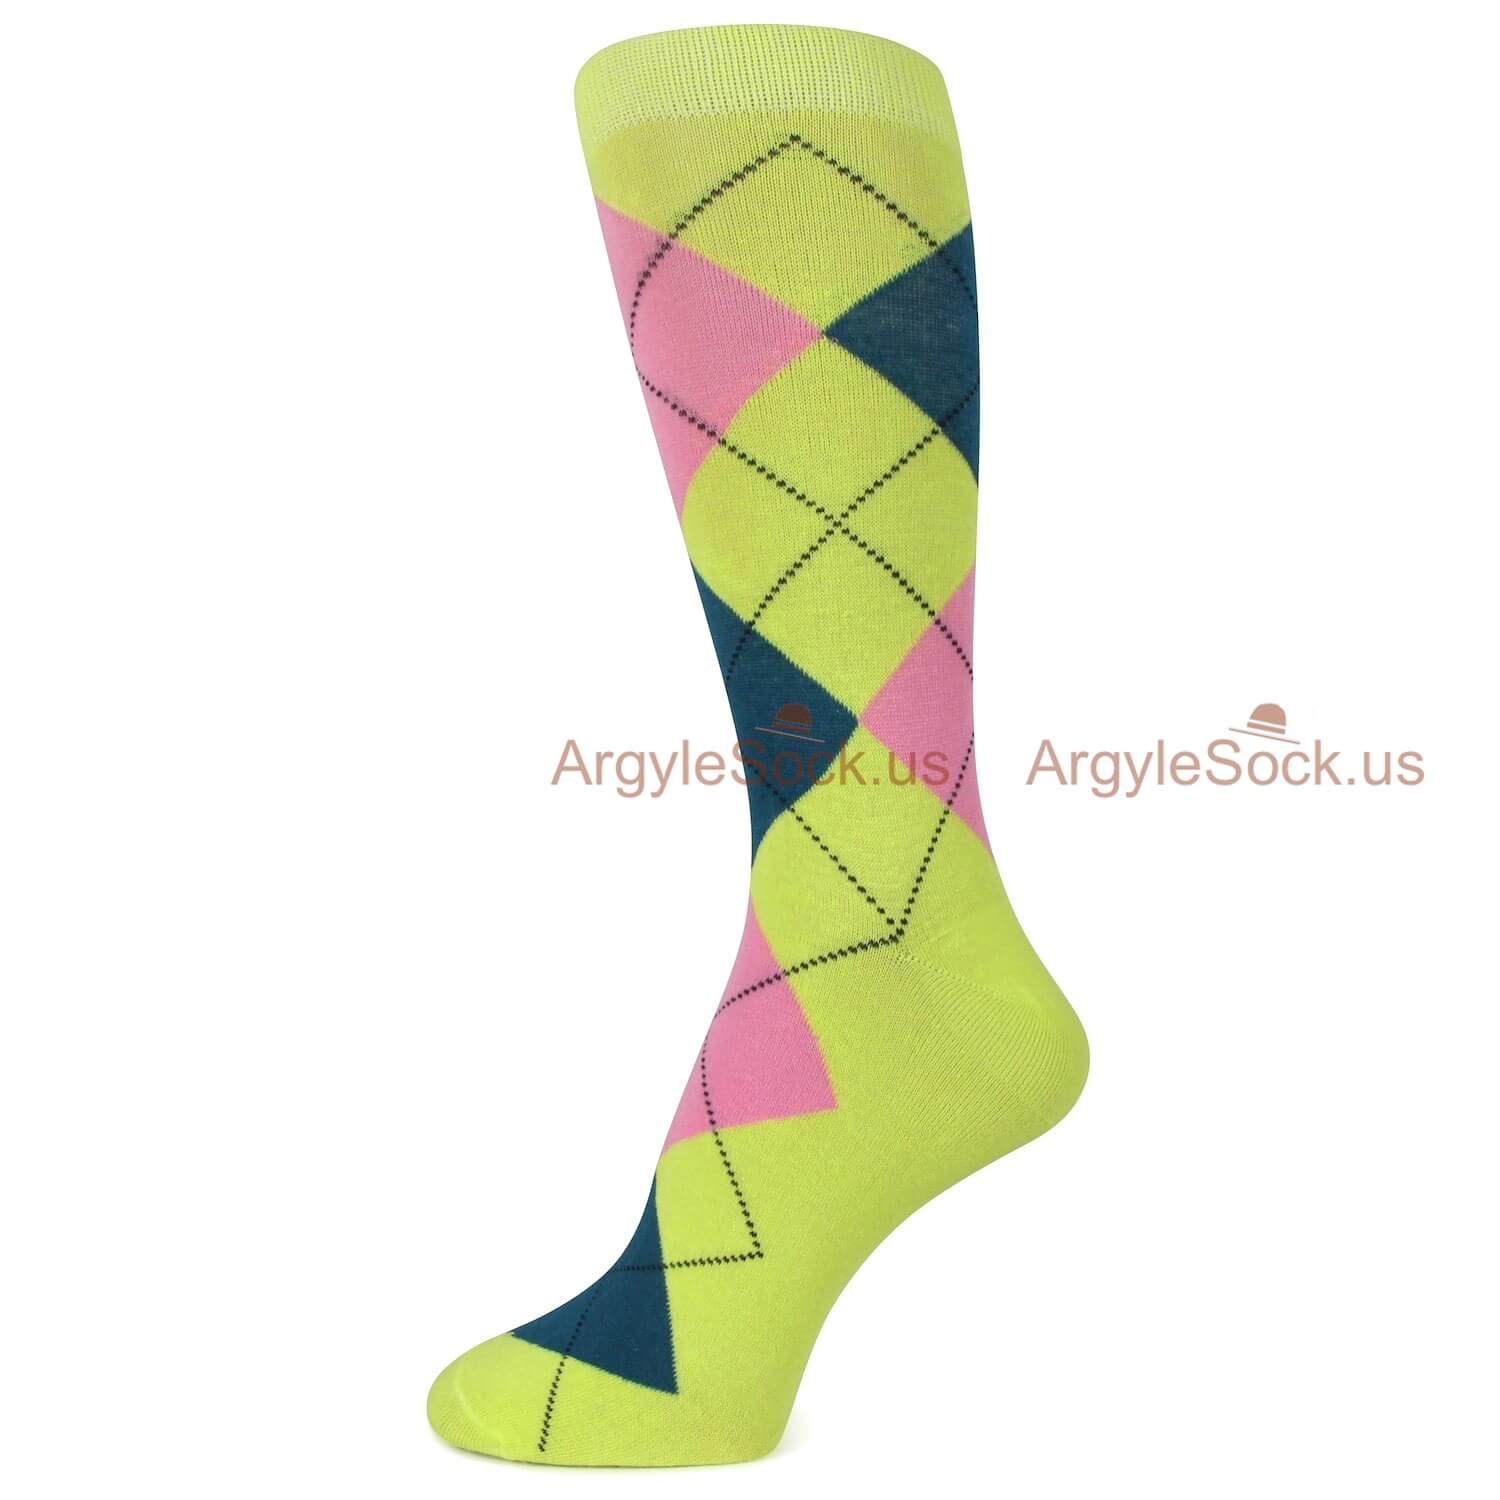 Lime Green and Pink Argyle Mens Socks